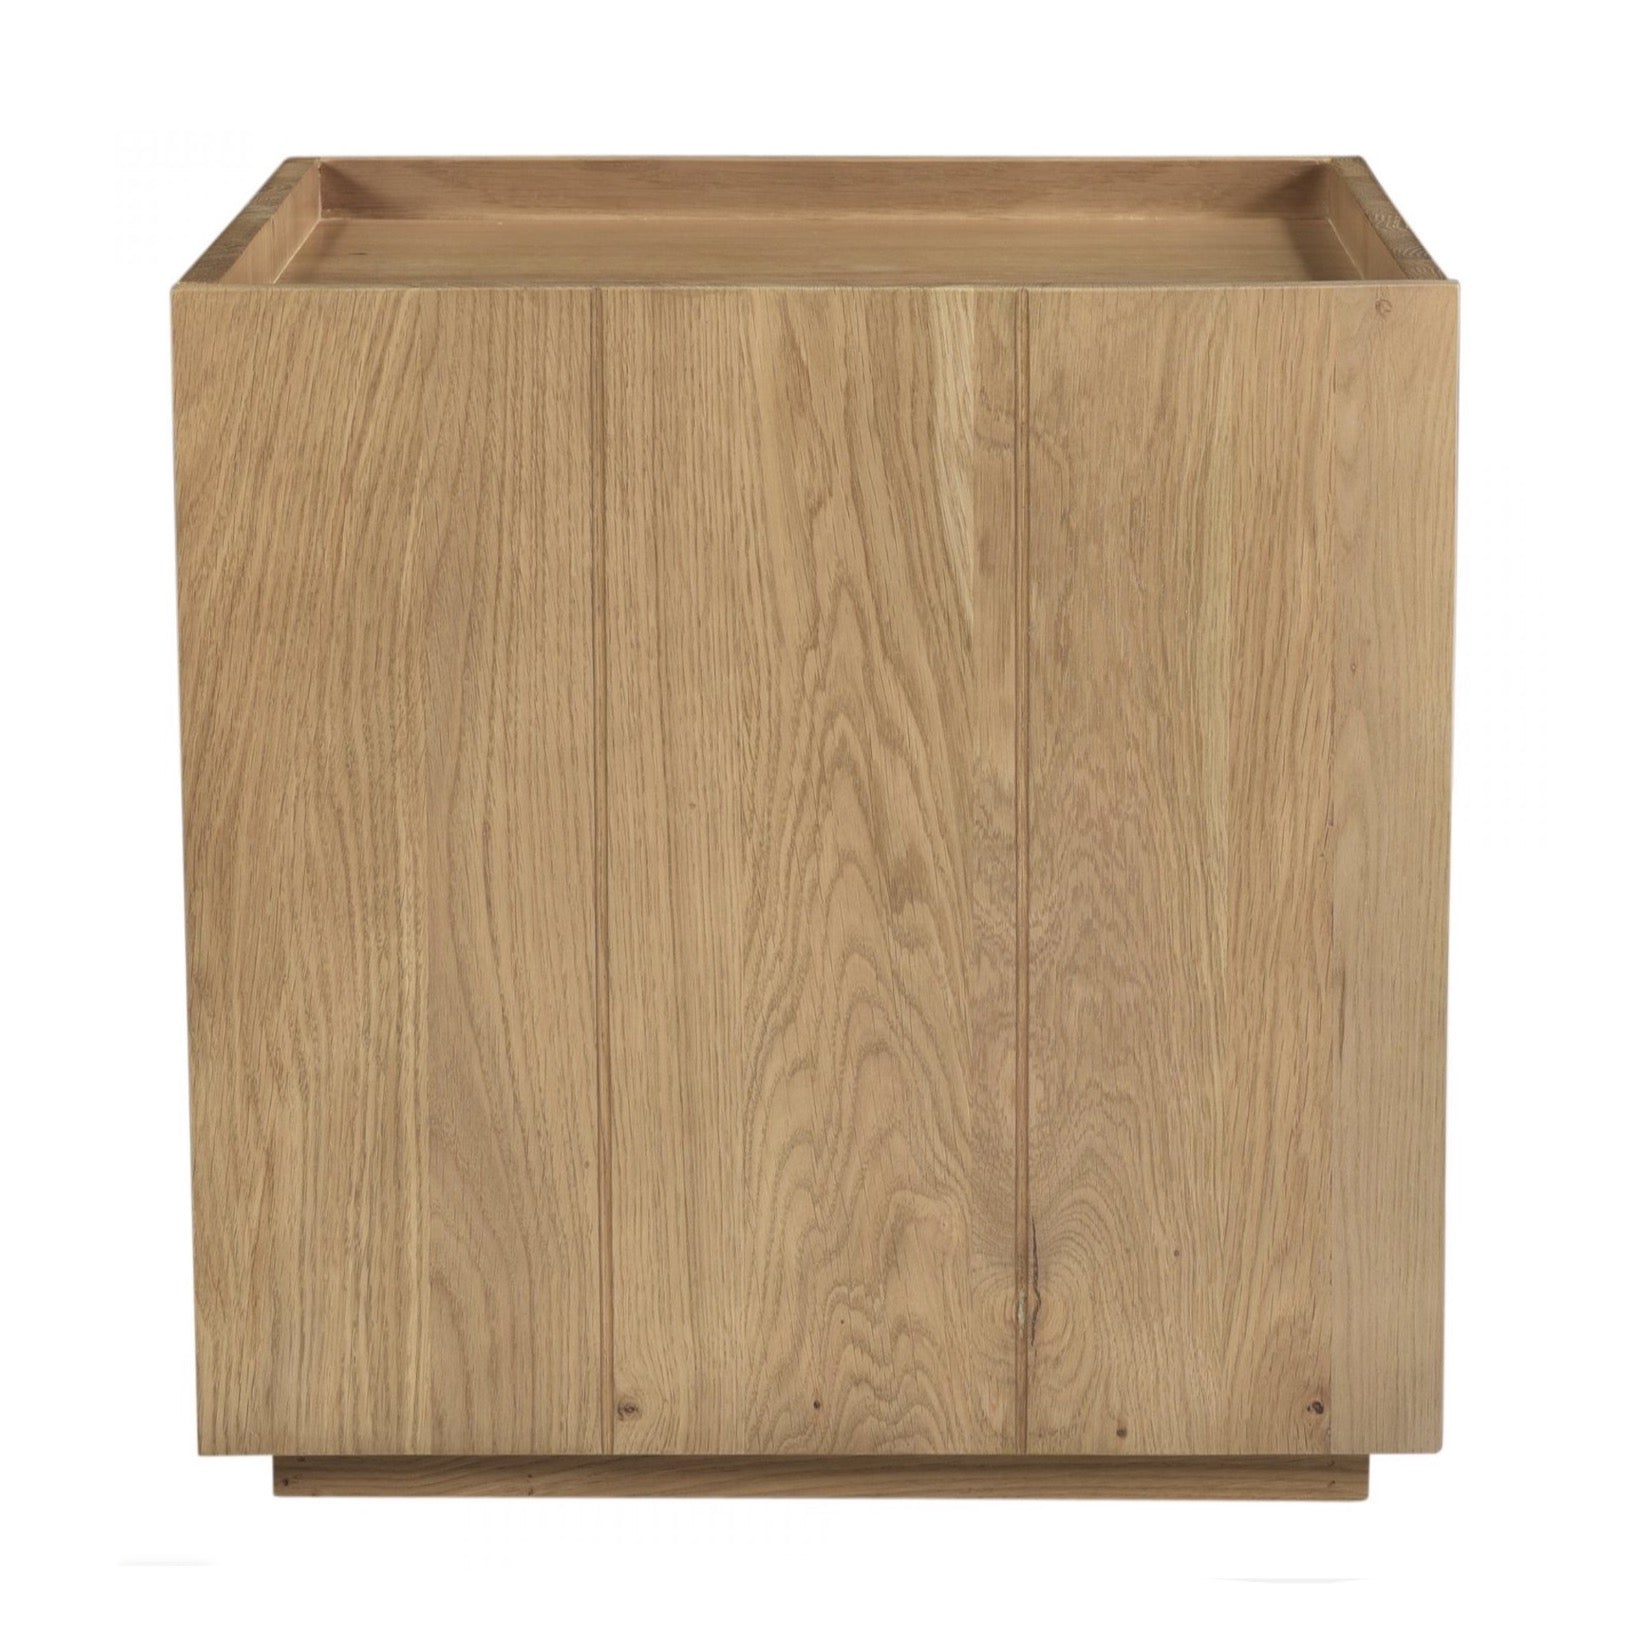 Plank Nightstand Natural, 18"W x 19"D x 18"H